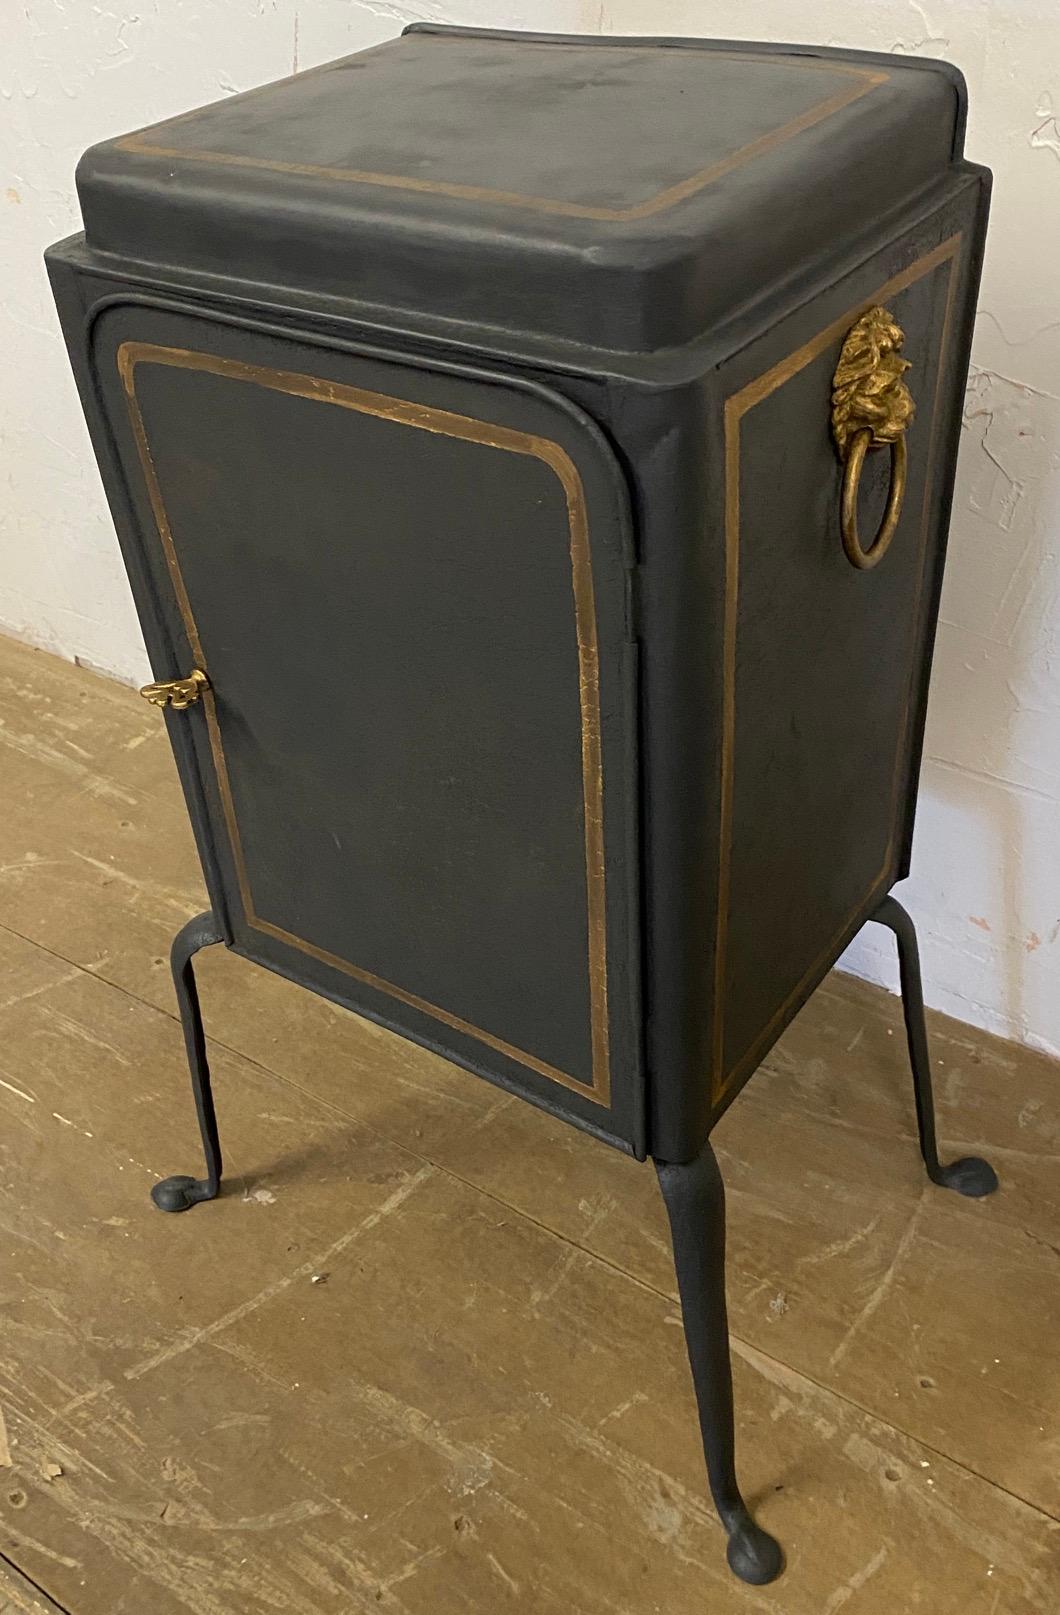 Unusual antique pie safe that has been made into a nightstand. A back has been added to what once was open for the pies to cool after it has been taken out of the oven. This particular stand is especially elegant with the gold trim and lion head